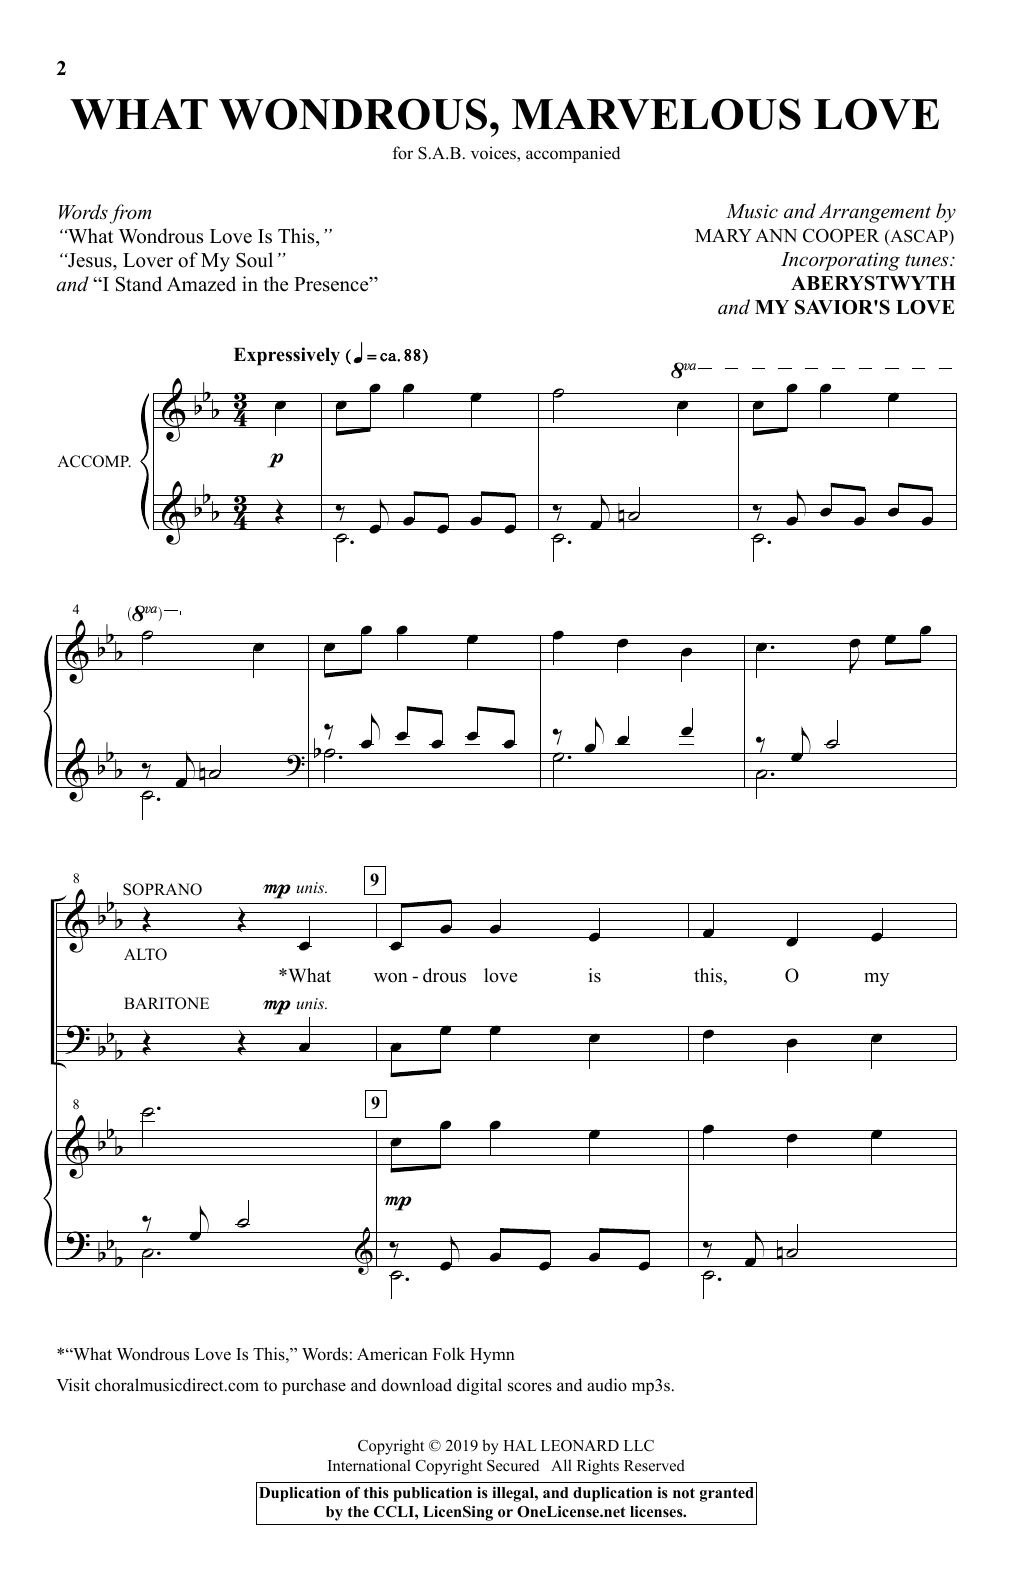 Download Mary Ann Cooper What Wondrous, Marvelous Love Sheet Music